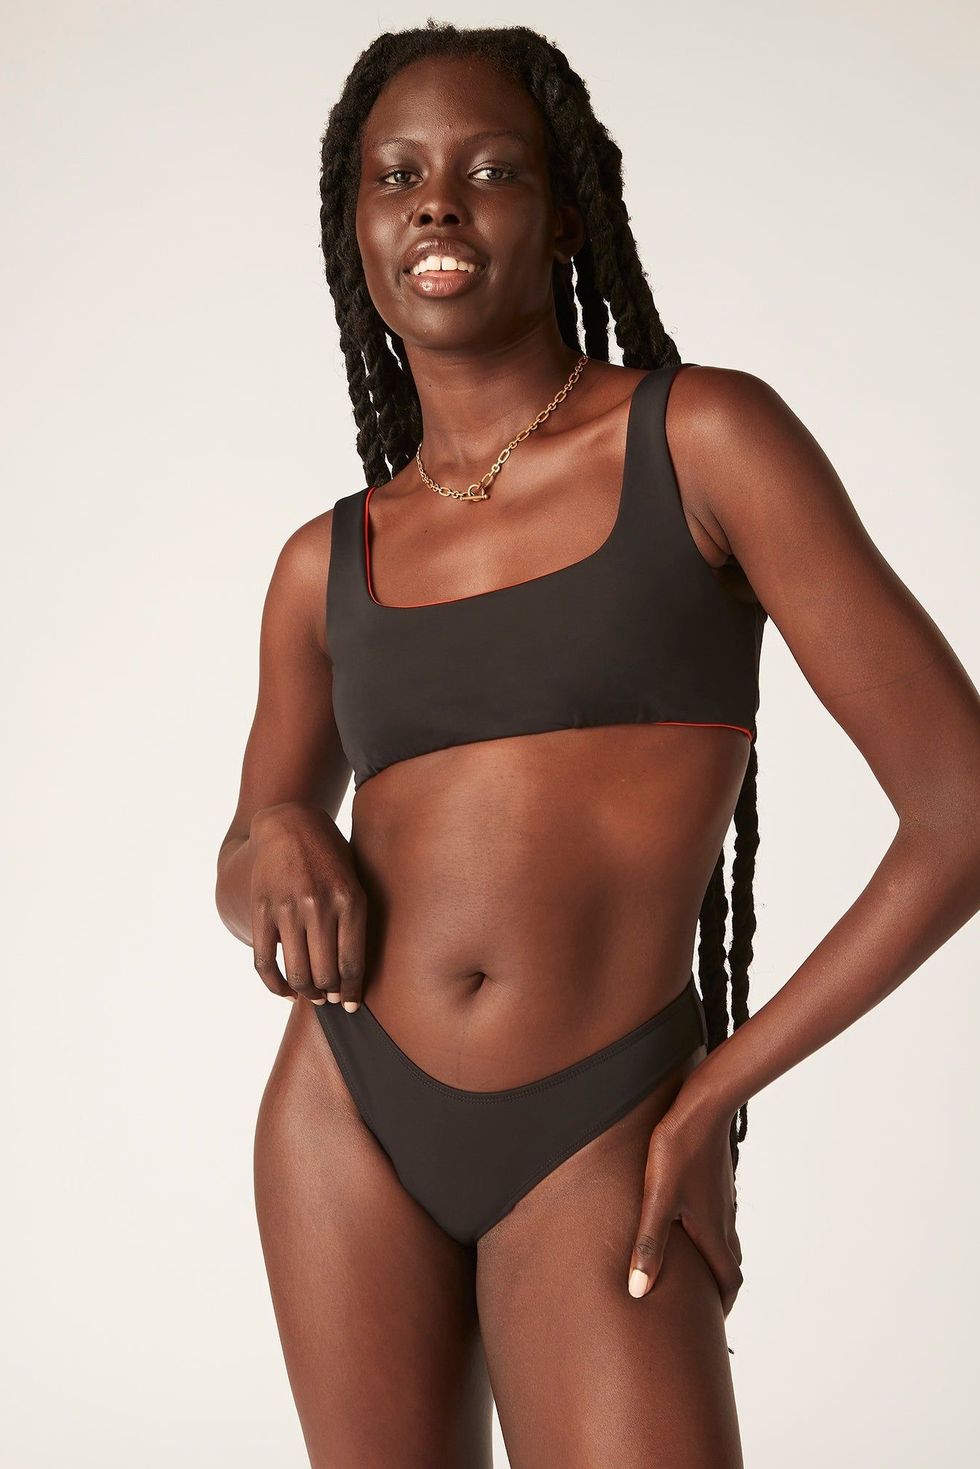 Poolside In Black Tribe Of The Bride, 44% OFF